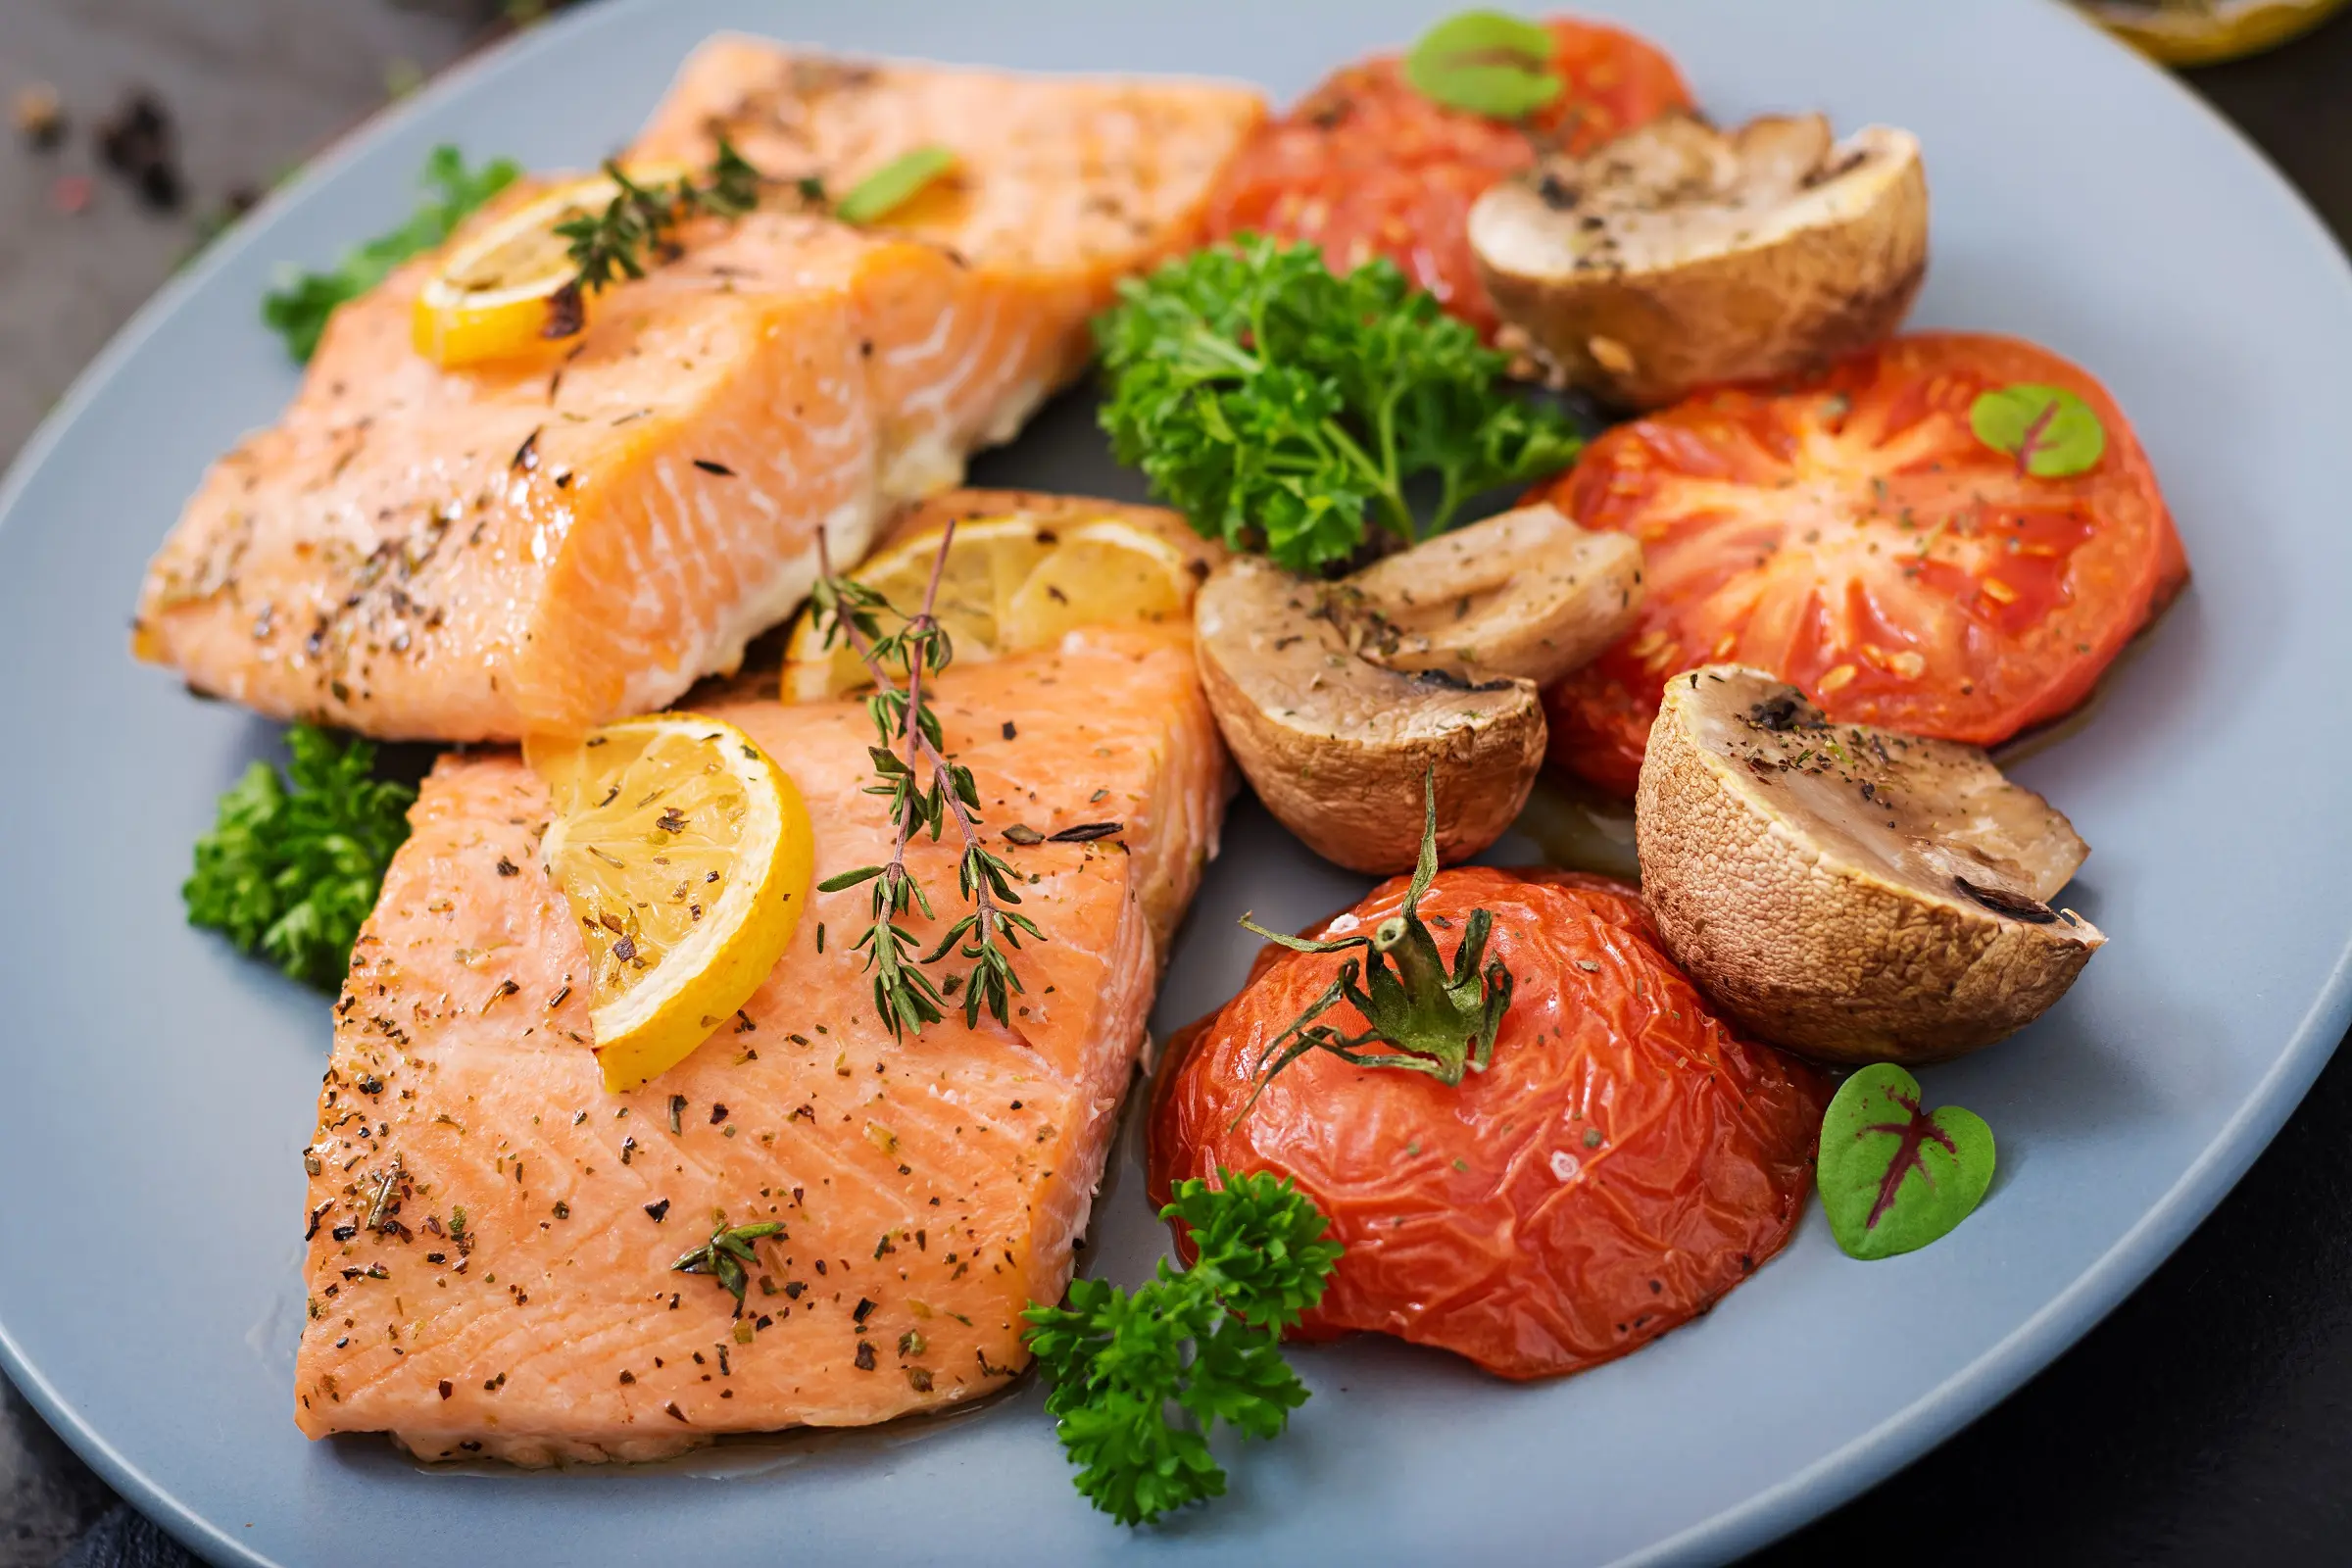 is smoked salmon high in purines - How much purine is in salmon